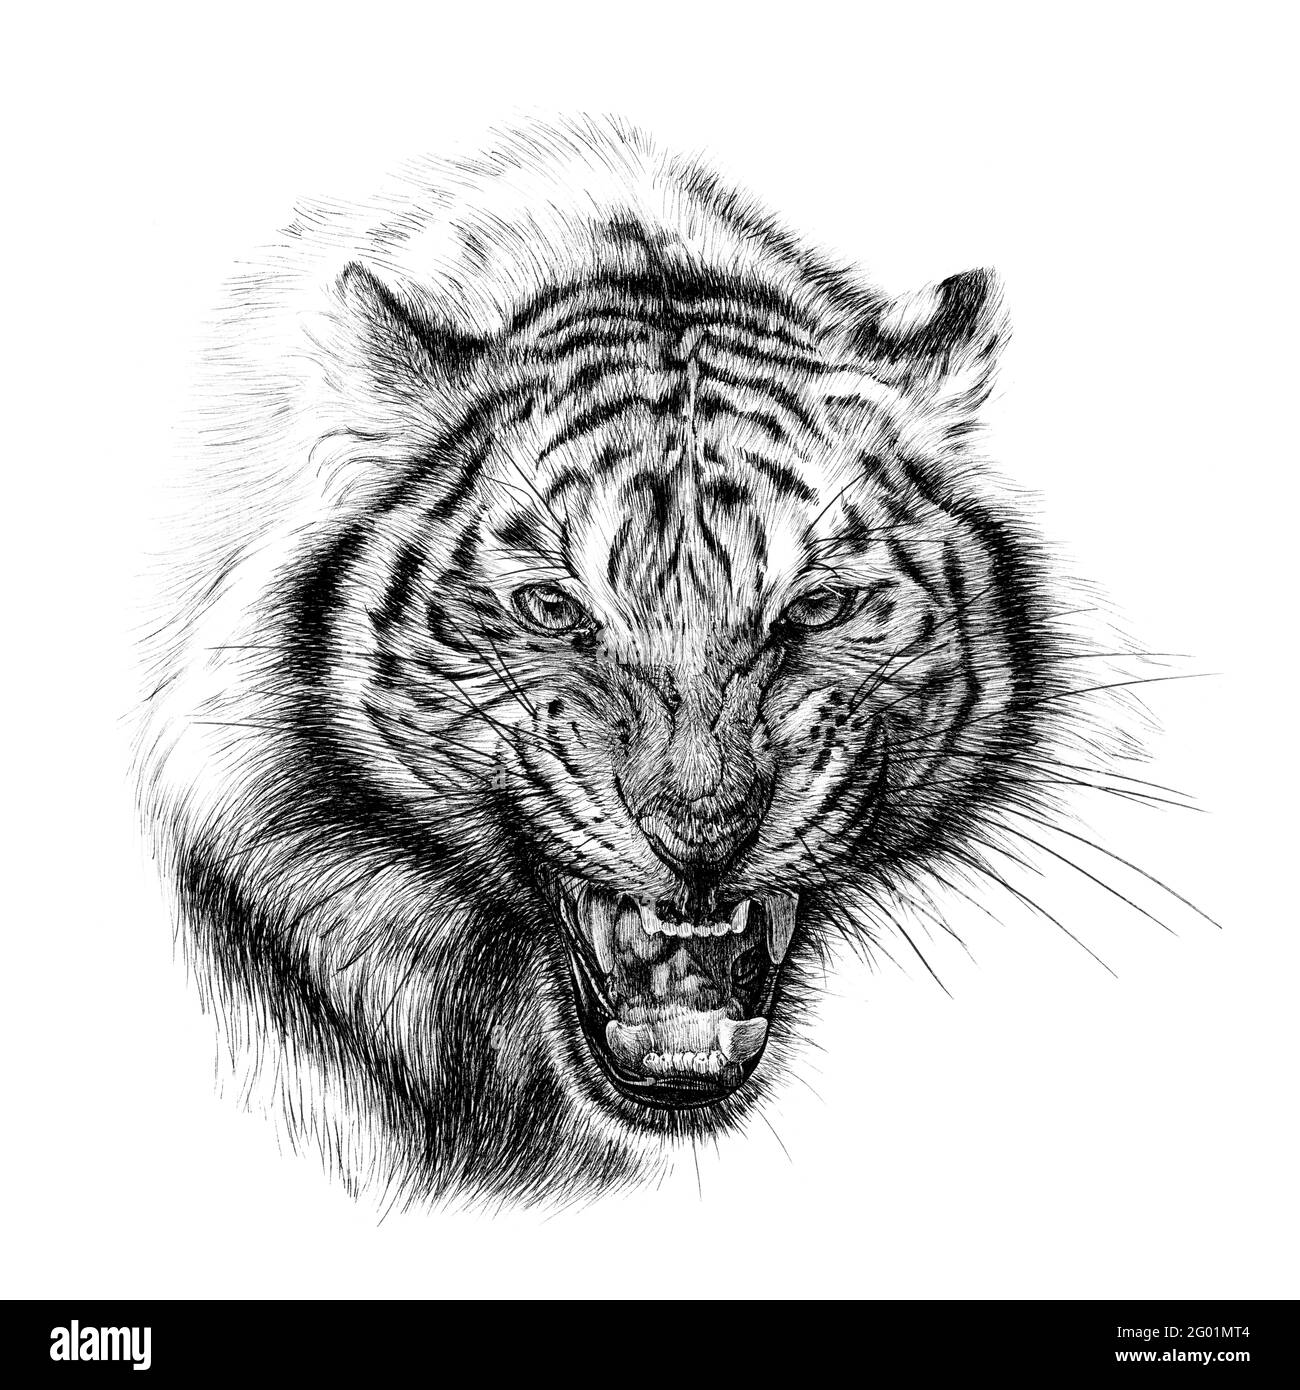 Illustration of Angry Tiger. Stock Vector - Illustration of danger, mascot:  86183854